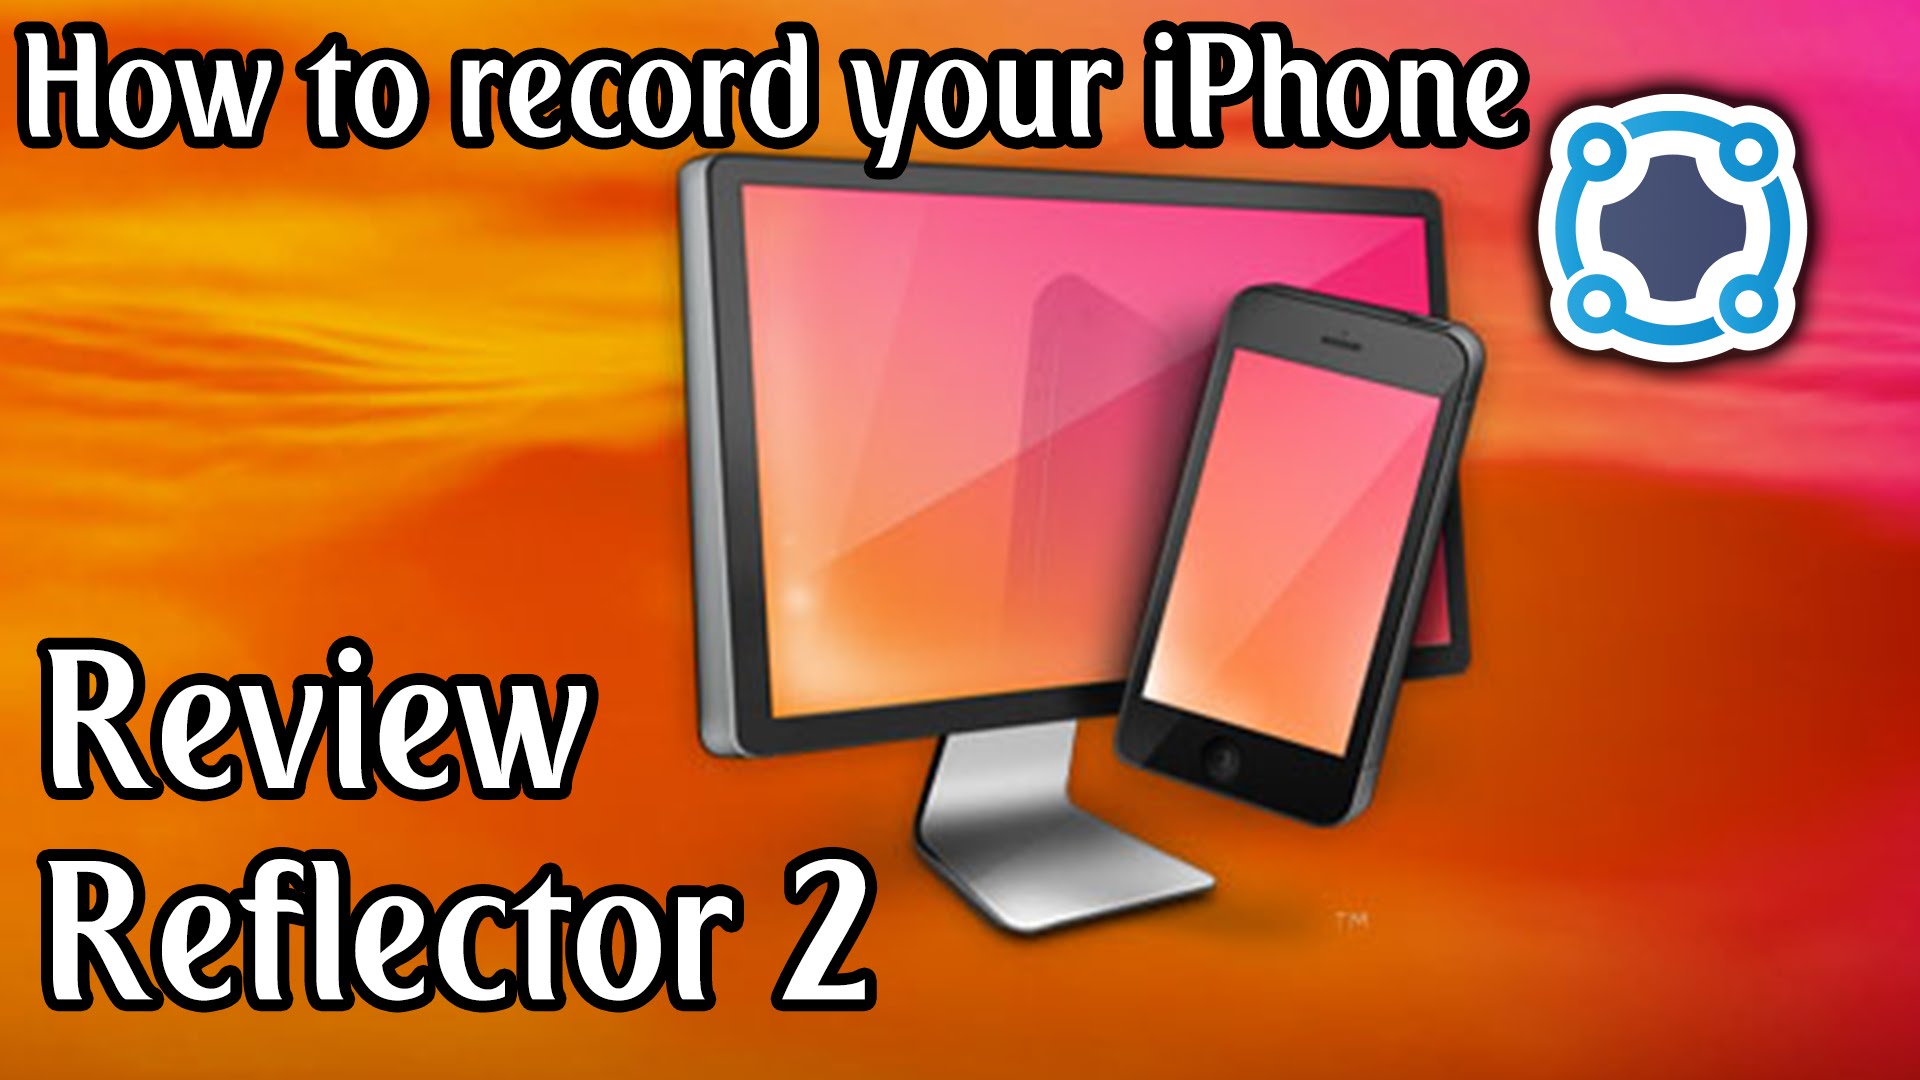 Review - Reflector 2